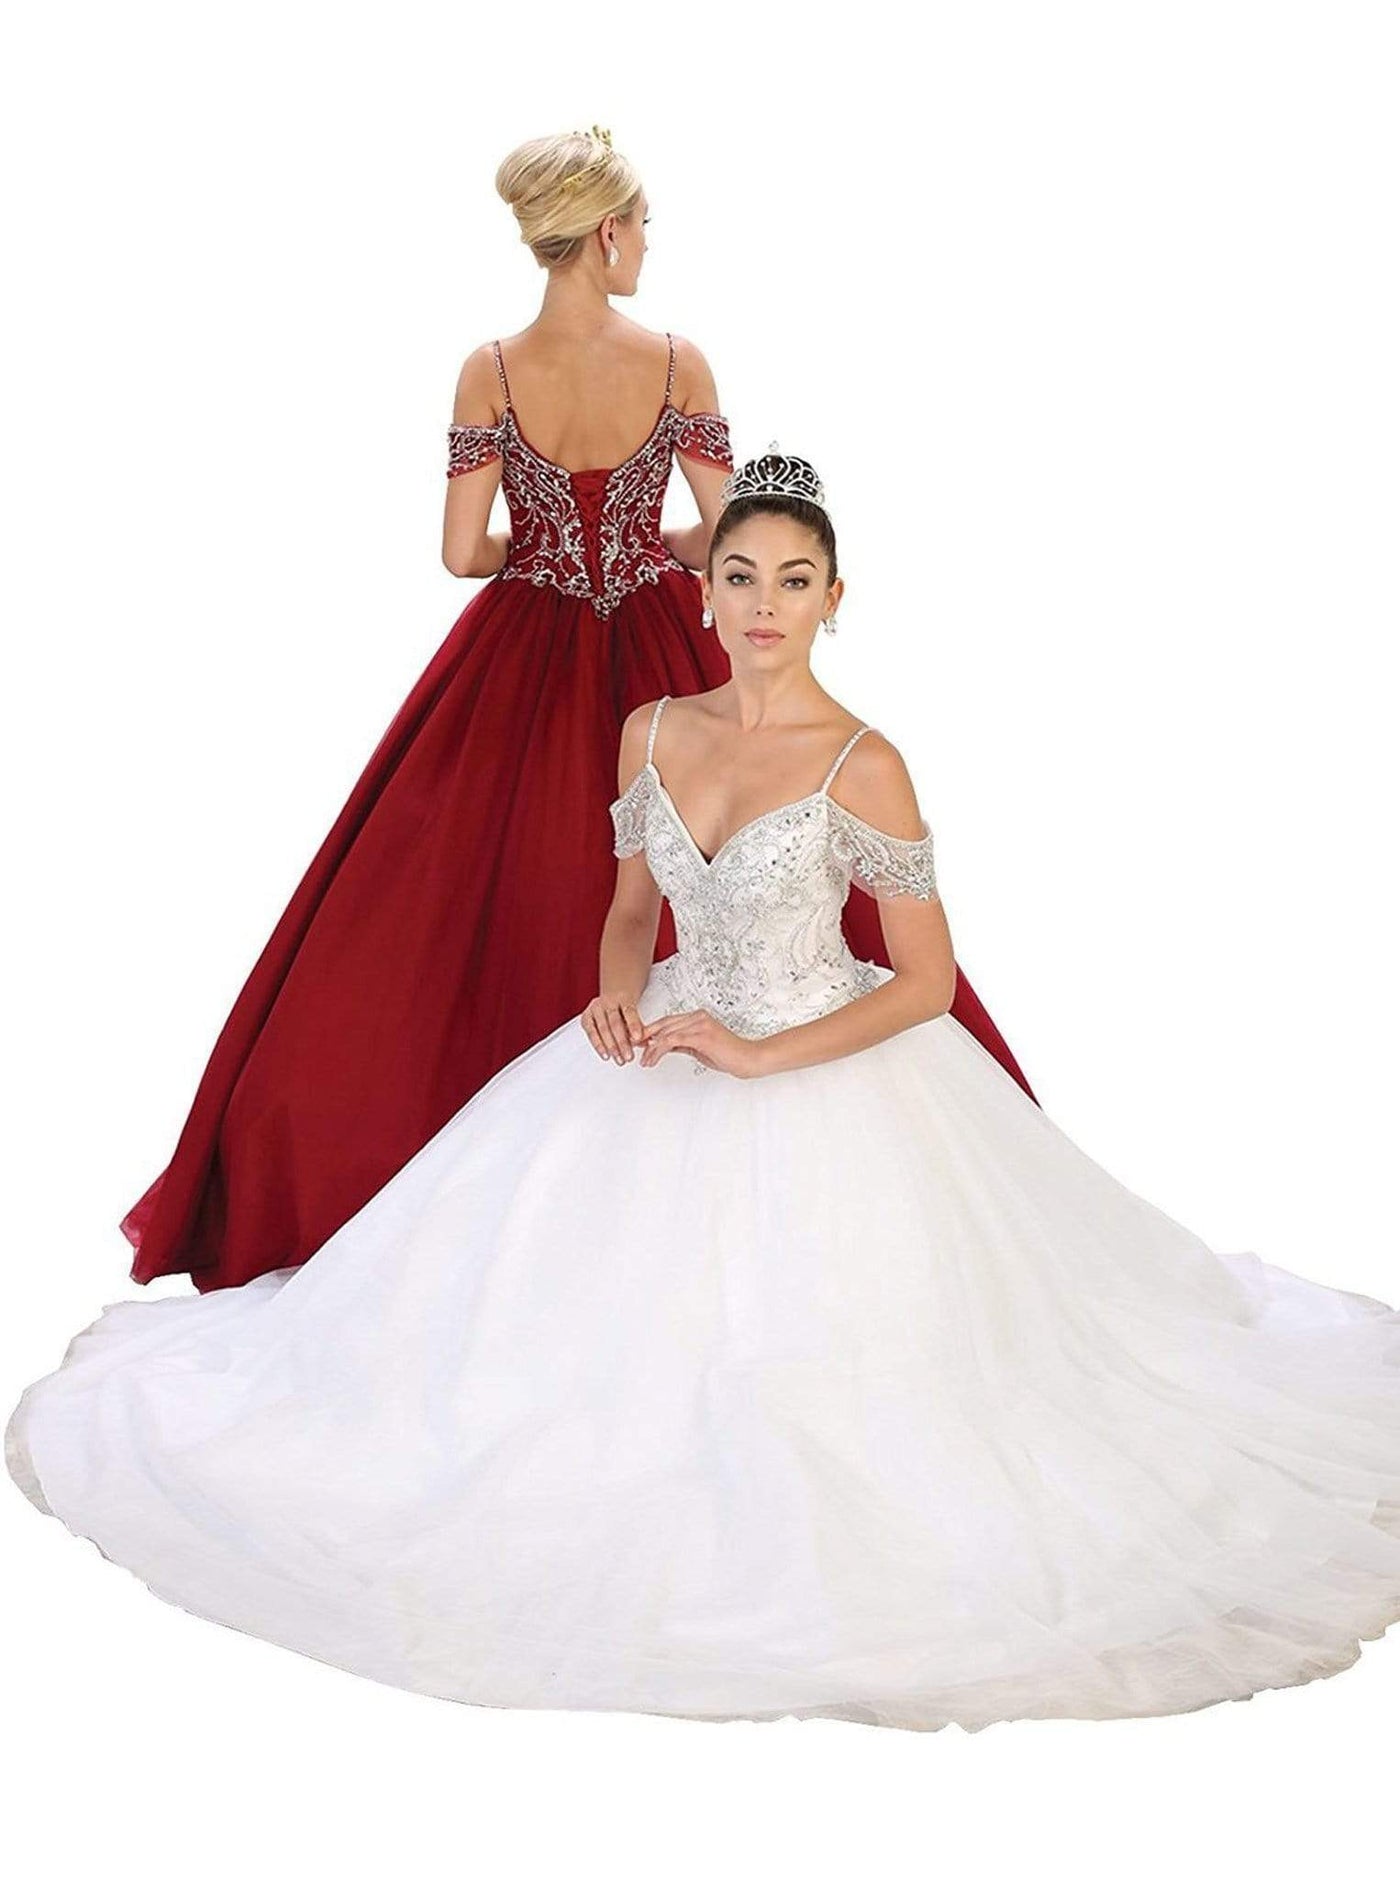 May Queen - LK96 Embellished V-neck Quinceanera Ballgown Special Occasion Dress 2 / White